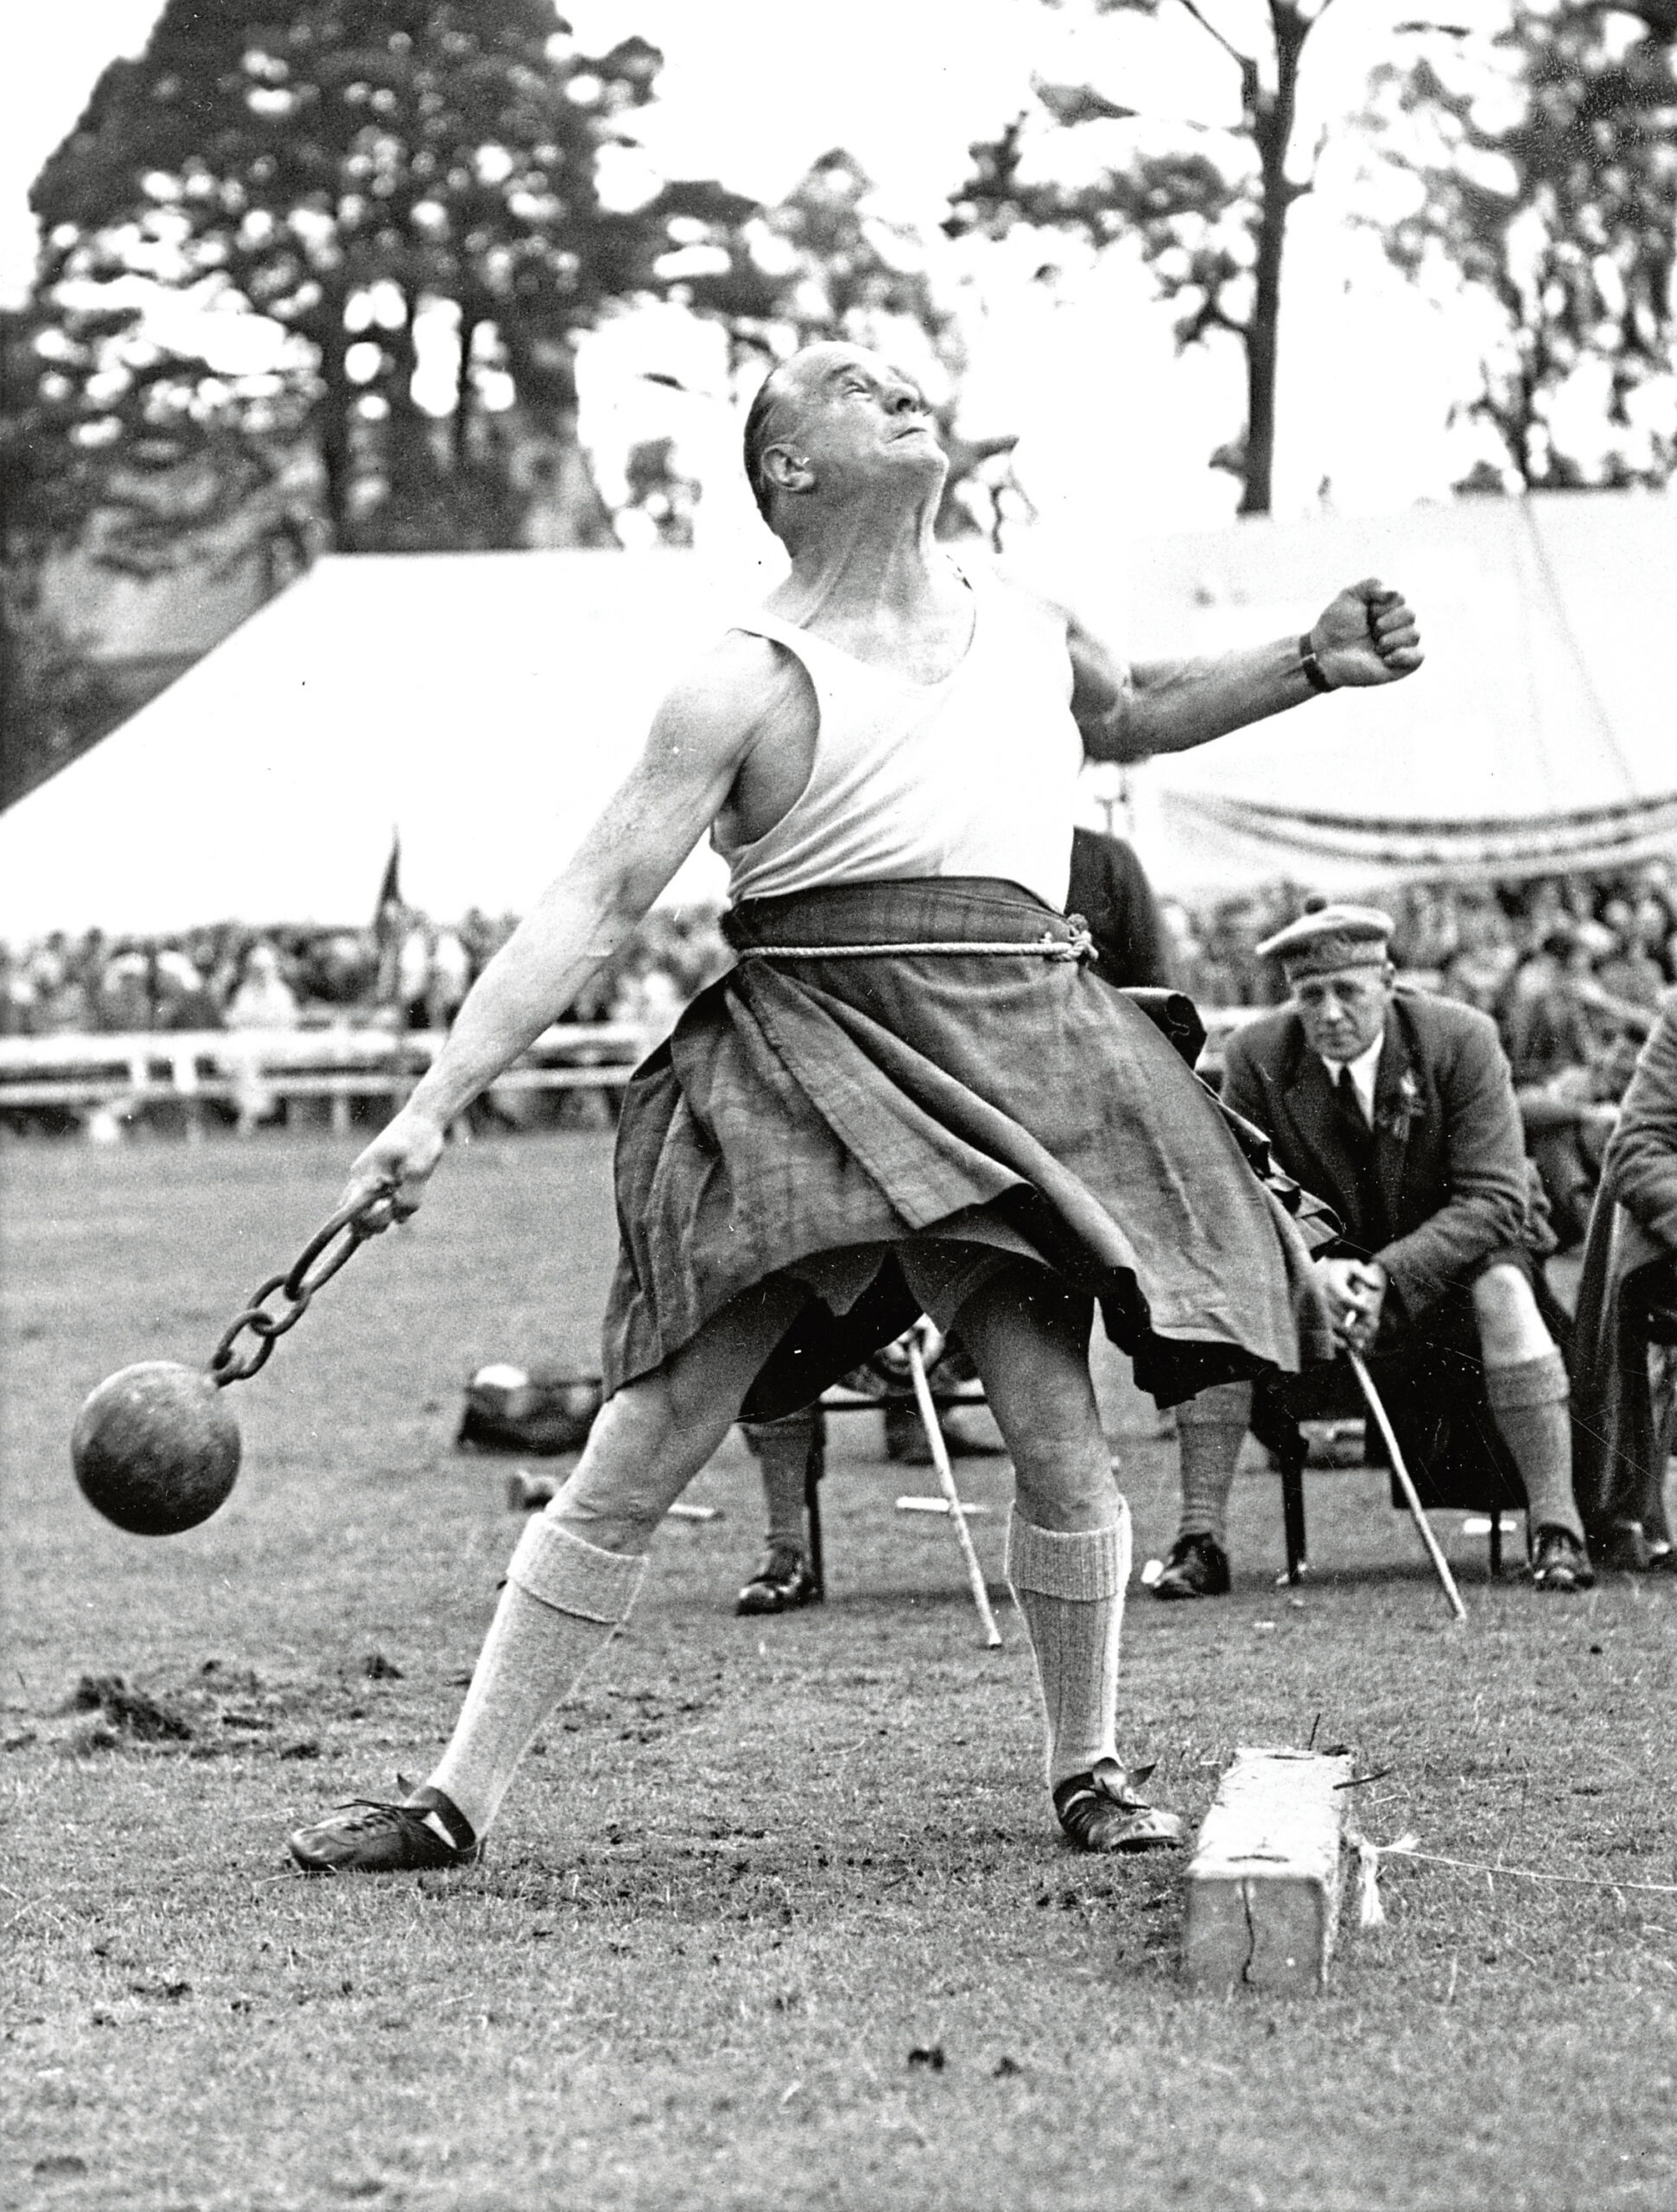  George Clark throwing the ball and chain at Aboyne Games in September 1962.